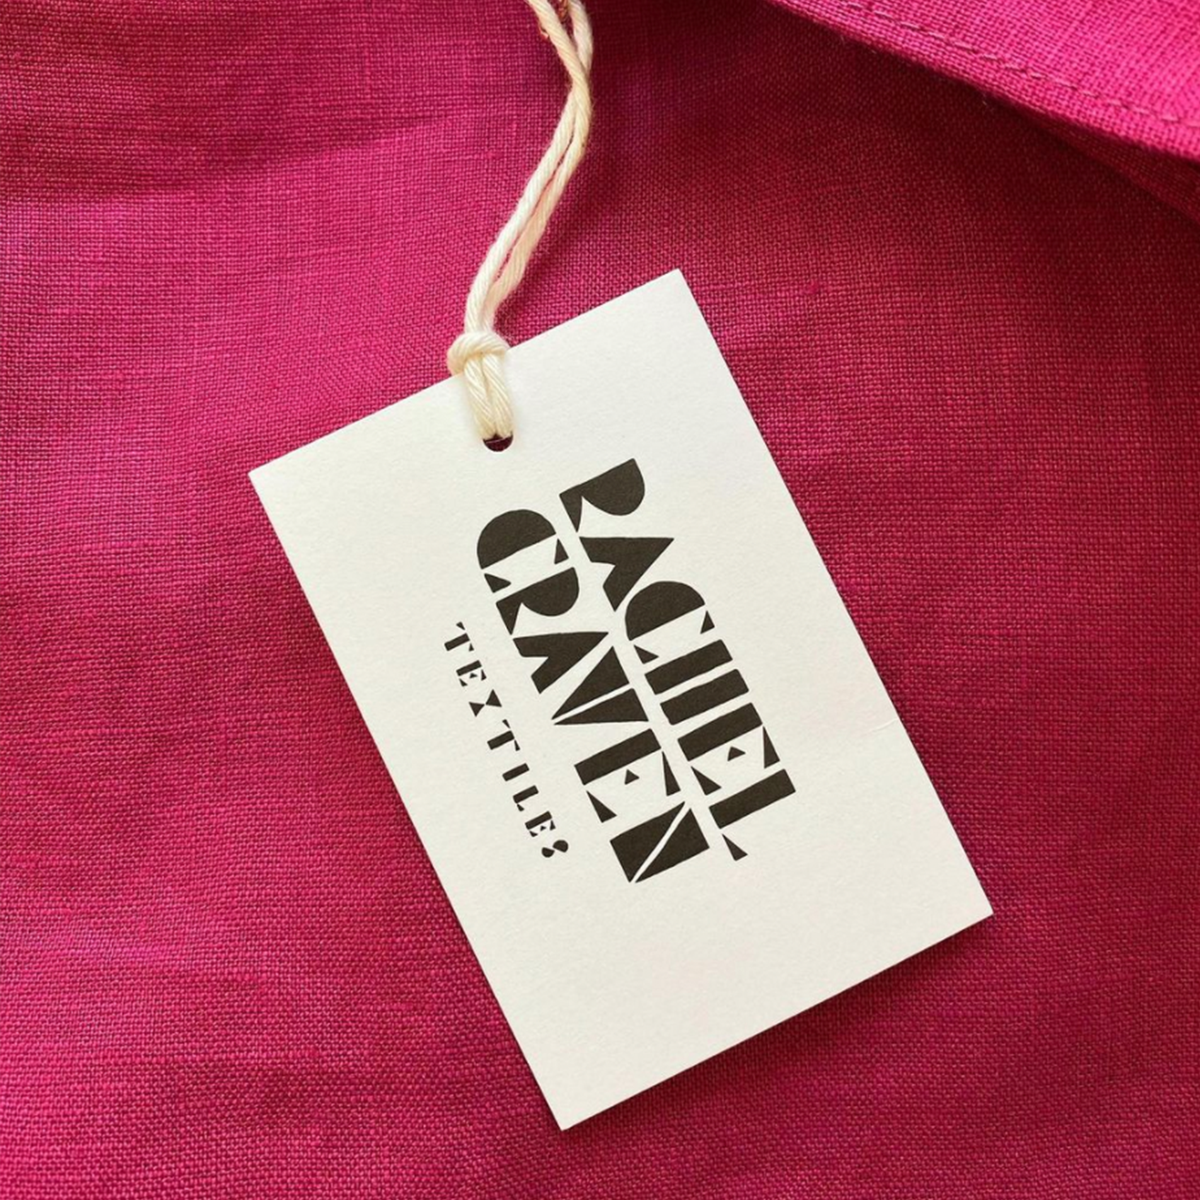 Hangtag from a Rachel Craven product on a magenta background